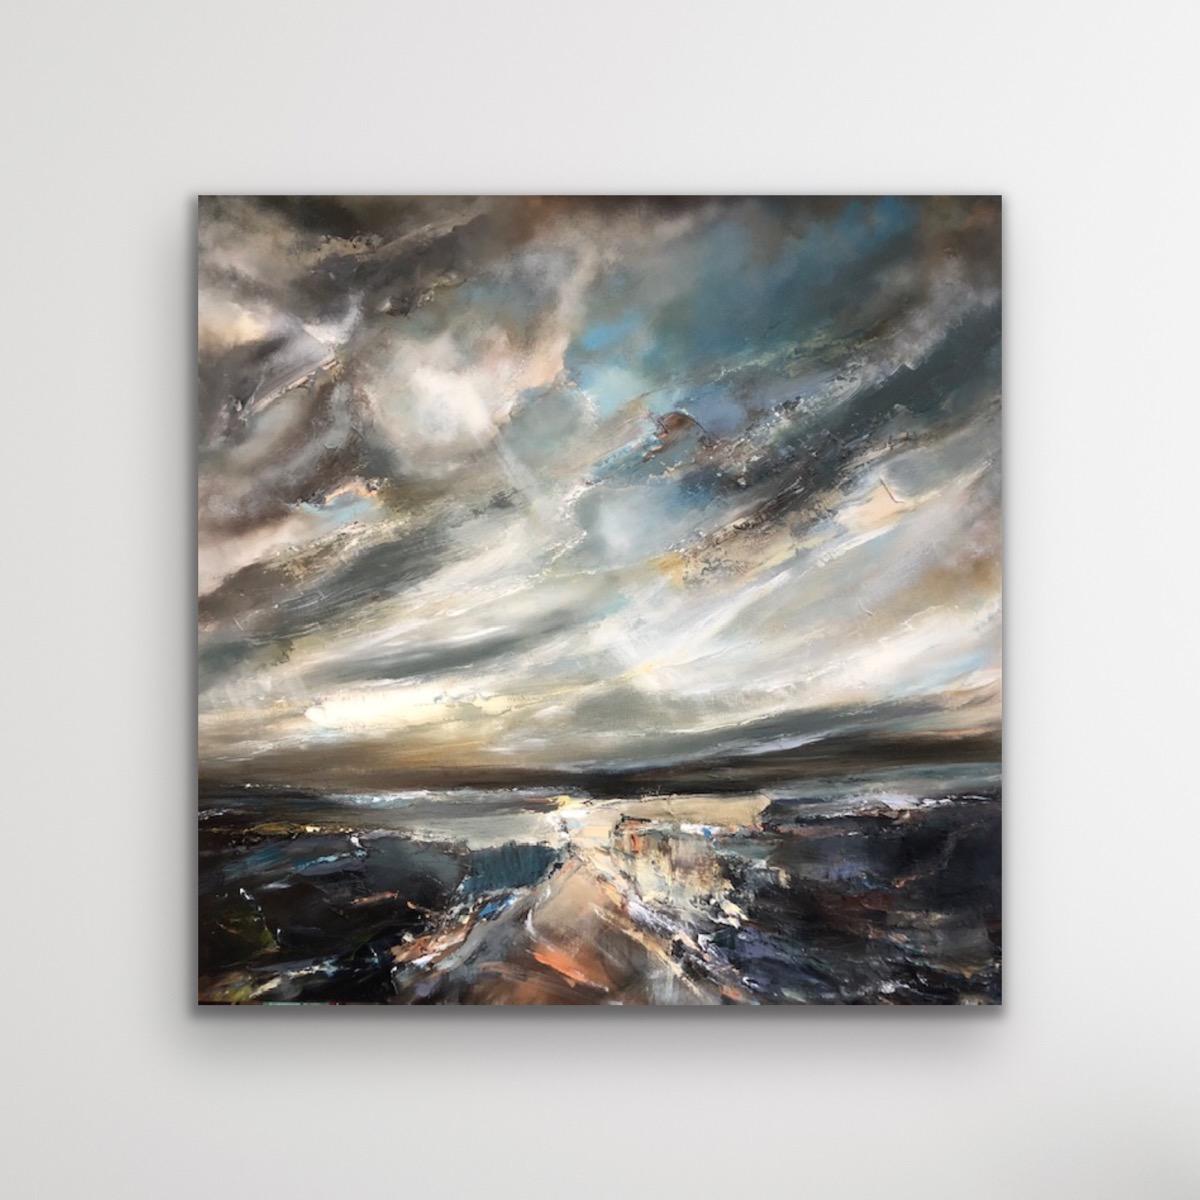 'Remembering' is an original seascape painting by Helen Howells. 'Remembering' was inspired by my beloved South Wales Coastline, and was painted during lockdown. Harnessing my memories, and emotions of many walks taken prior to restrictions. It is